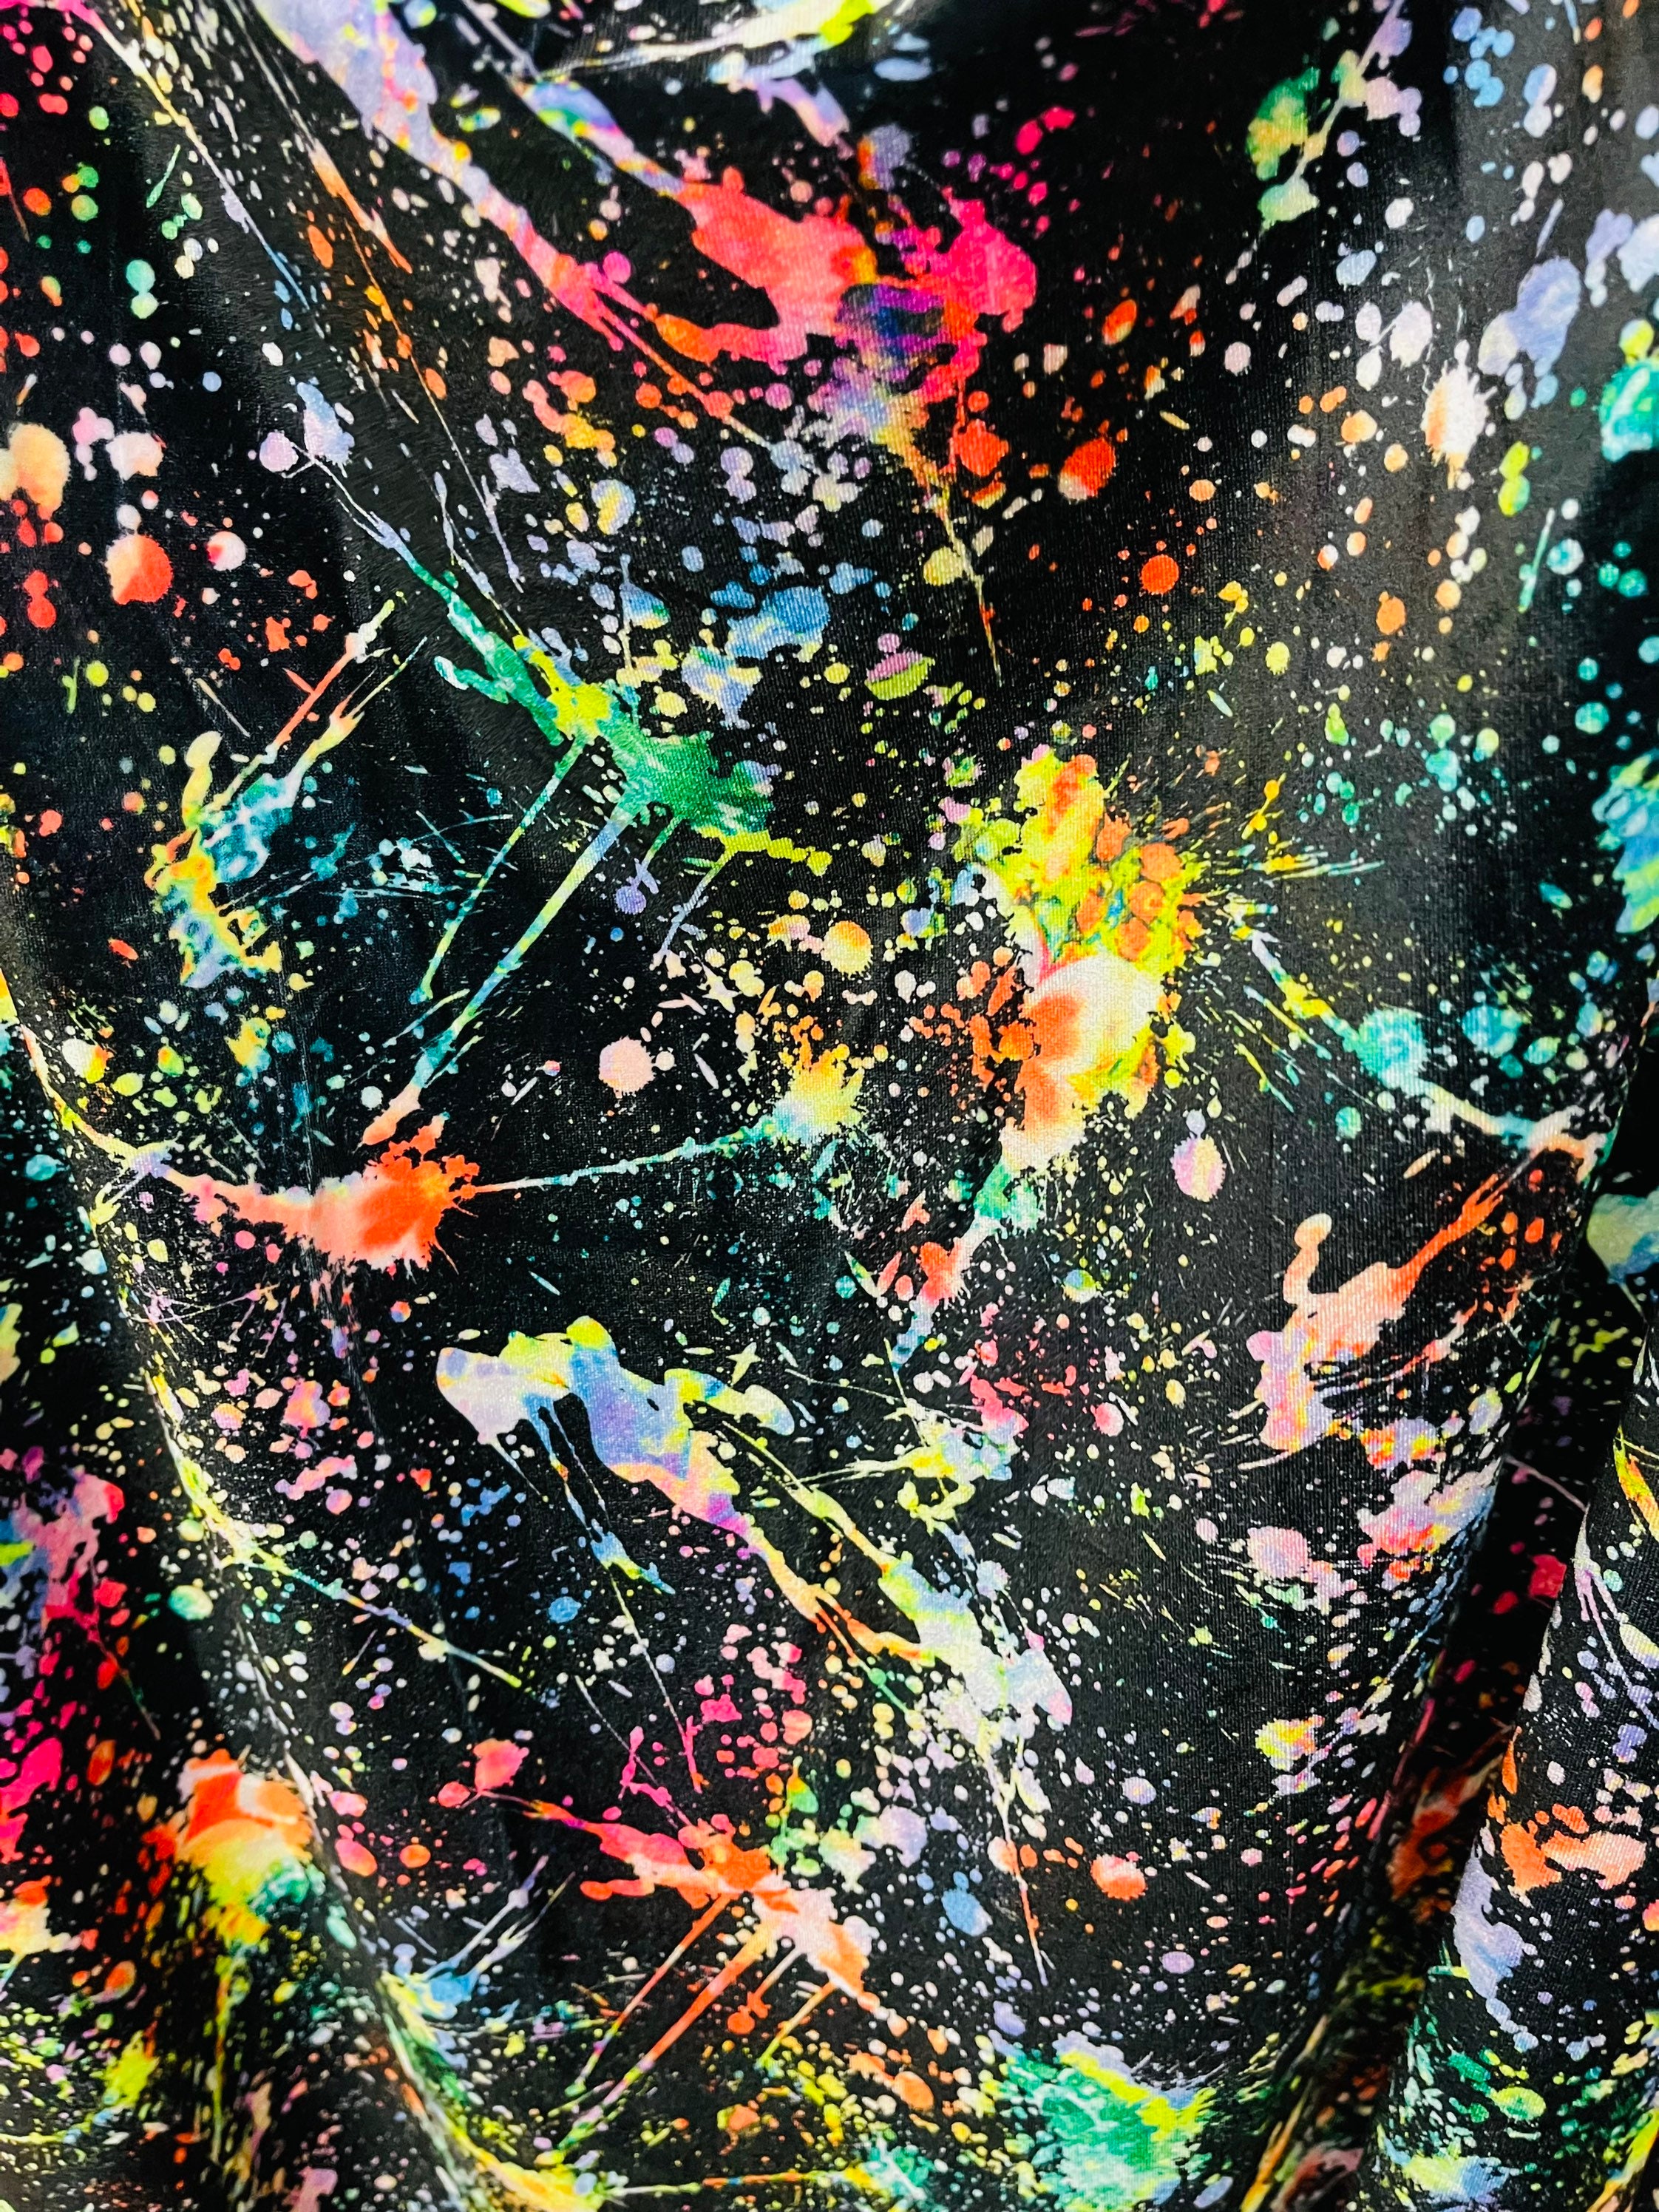 New Splatter Paint Design Black/multicolor Print on Best Quality of Stretch  Velvet 4-way Stretch 58/60 Sold by the YD. Ships Worldwide -  Canada